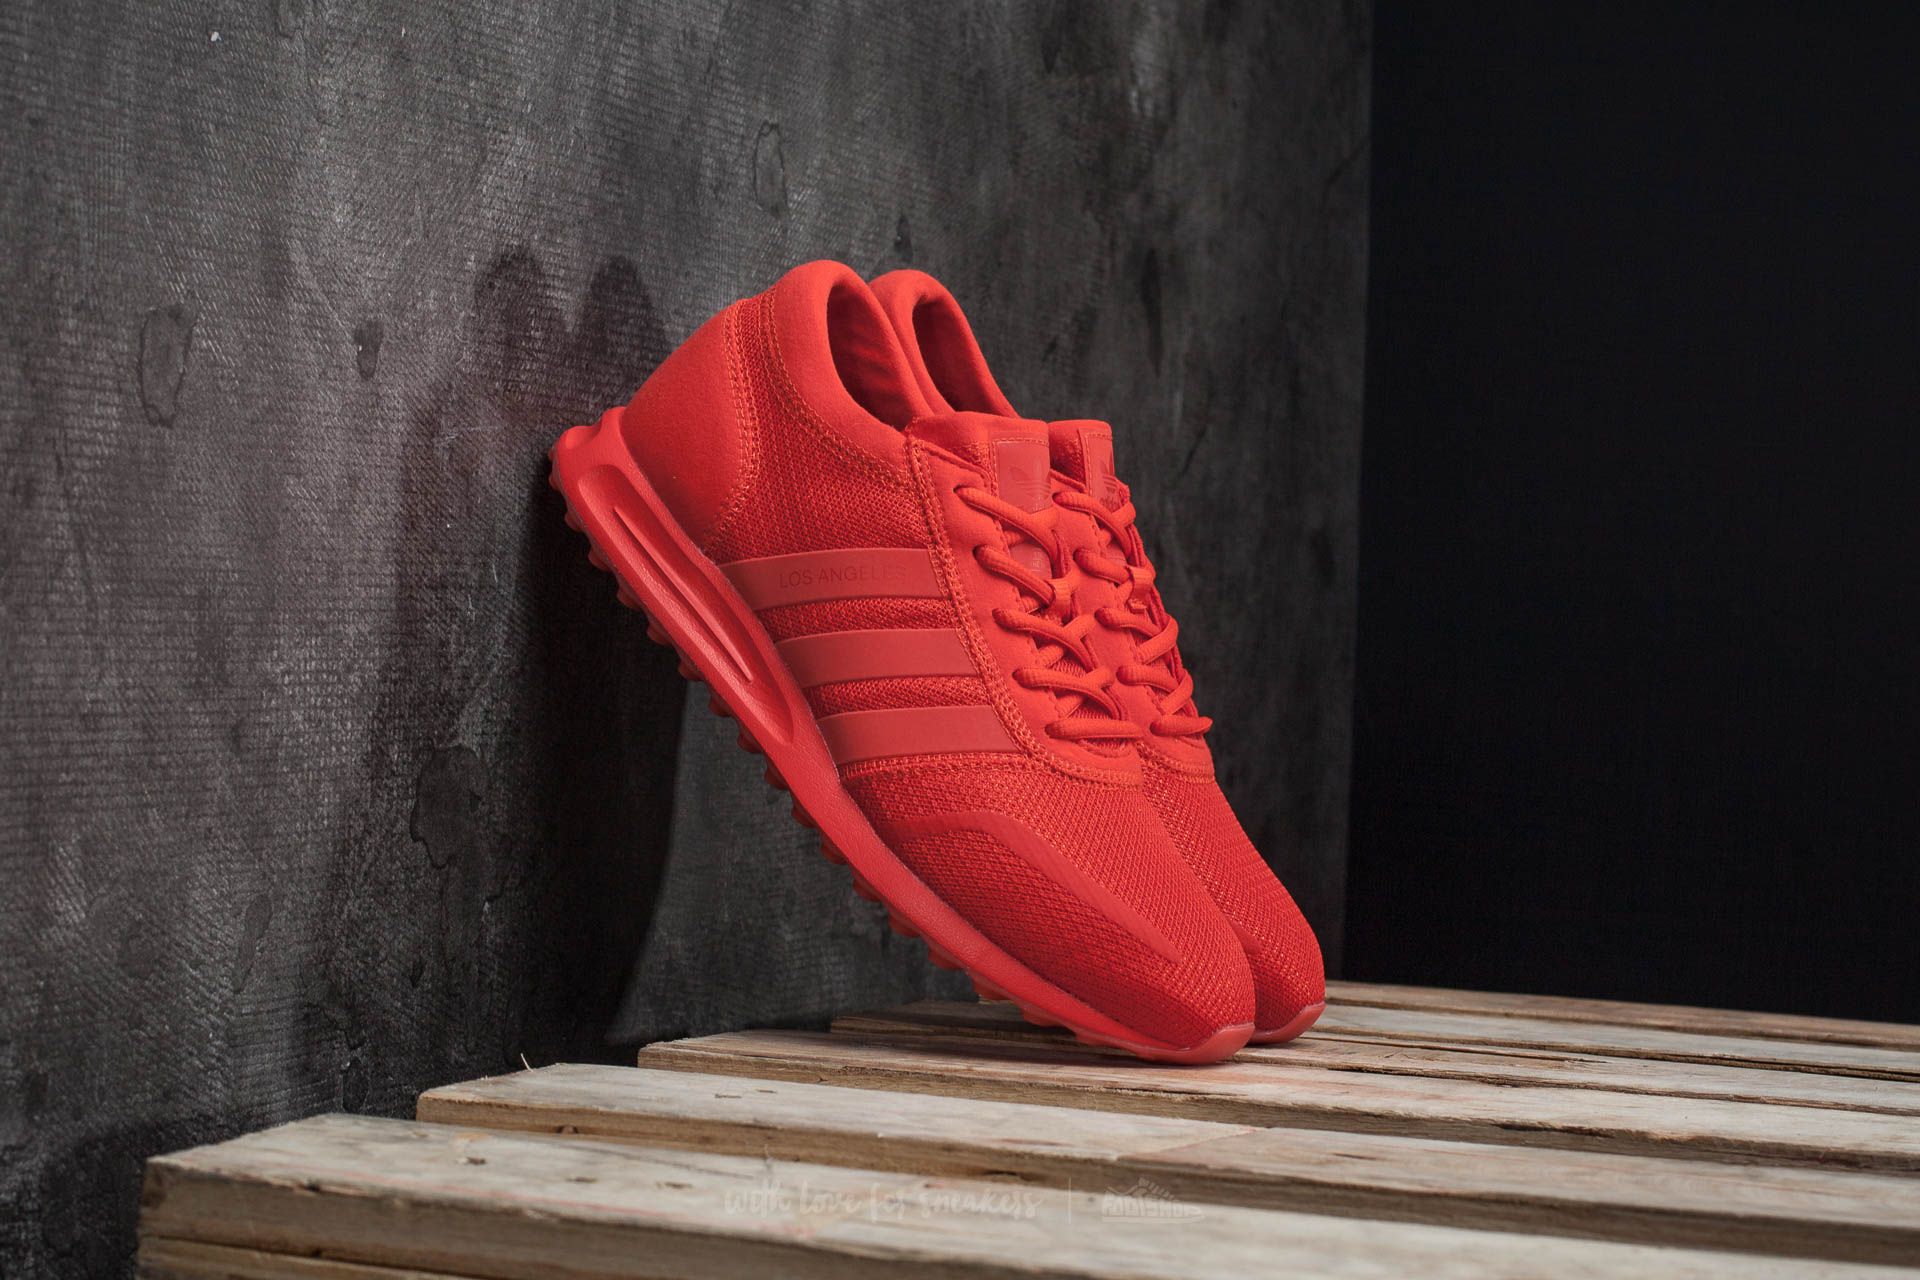 Pánské tenisky a boty adidas Los Angeles Core Red/ Core Red/ Core Red